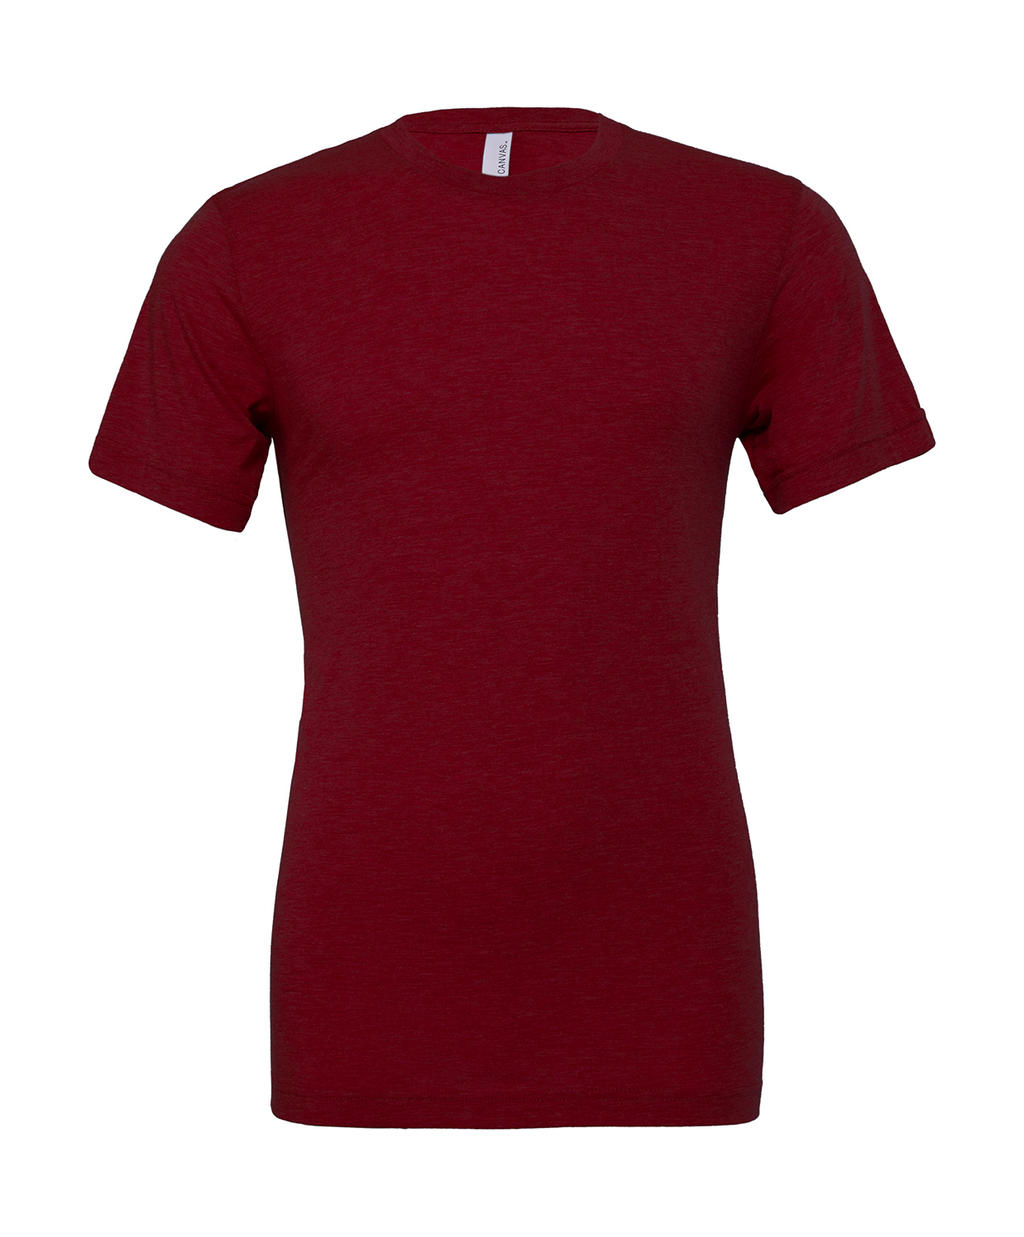  Unisex Triblend Short Sleeve Tee in Farbe Cardinal Triblend